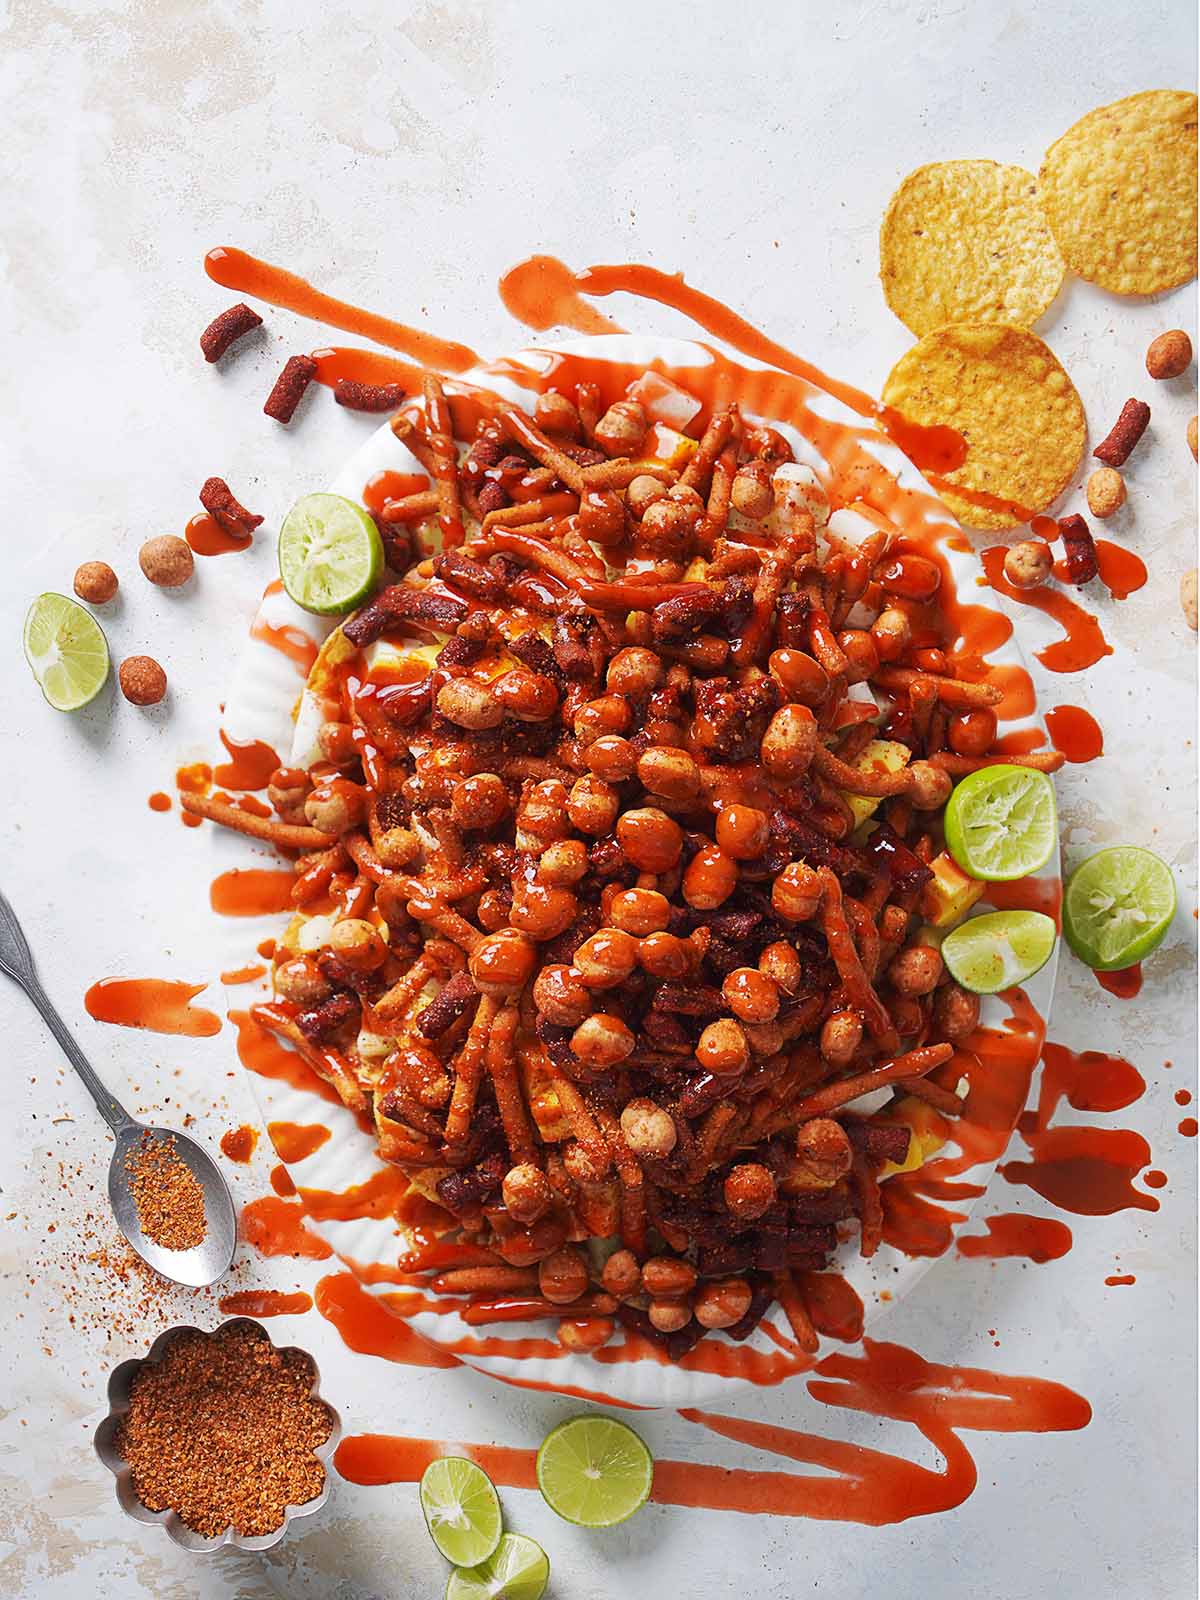 A plate filled with spicy Mexican candy and jicama drizzled with chamoy.